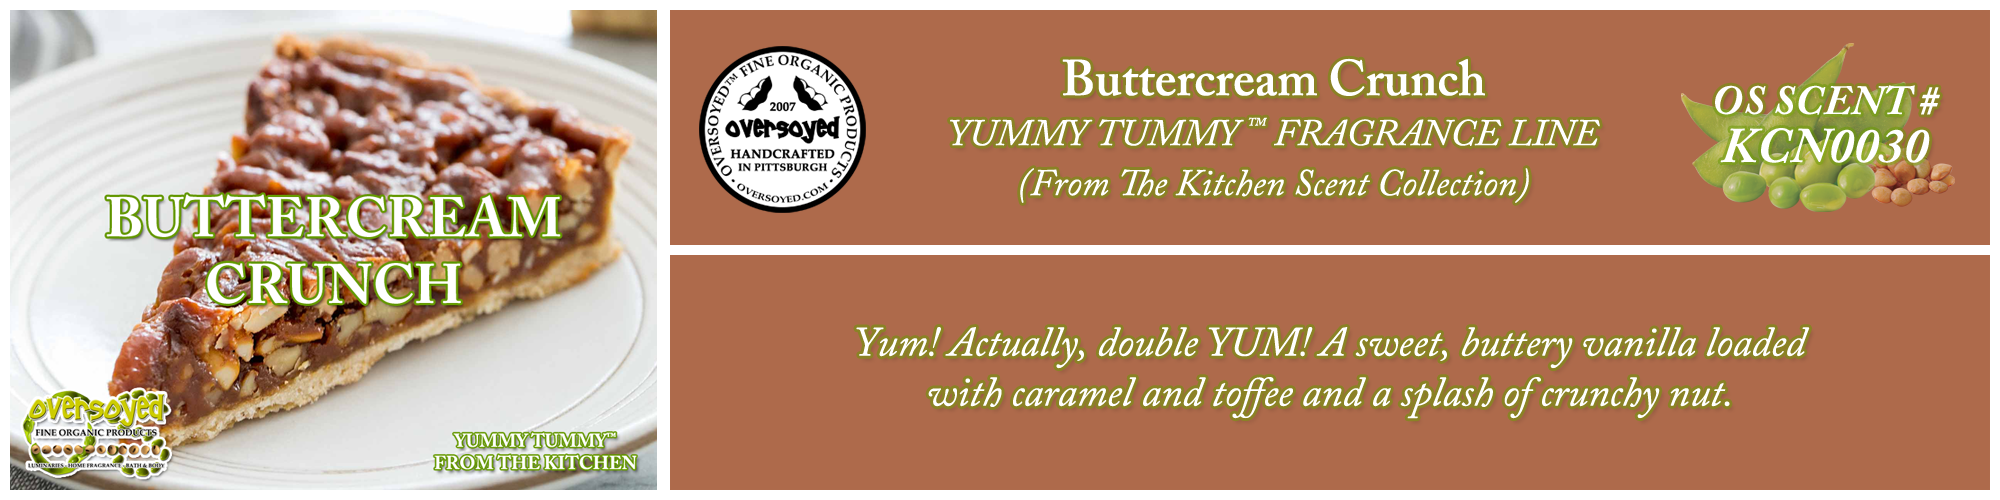 Buttercream Crunch Handcrafted Products Collection